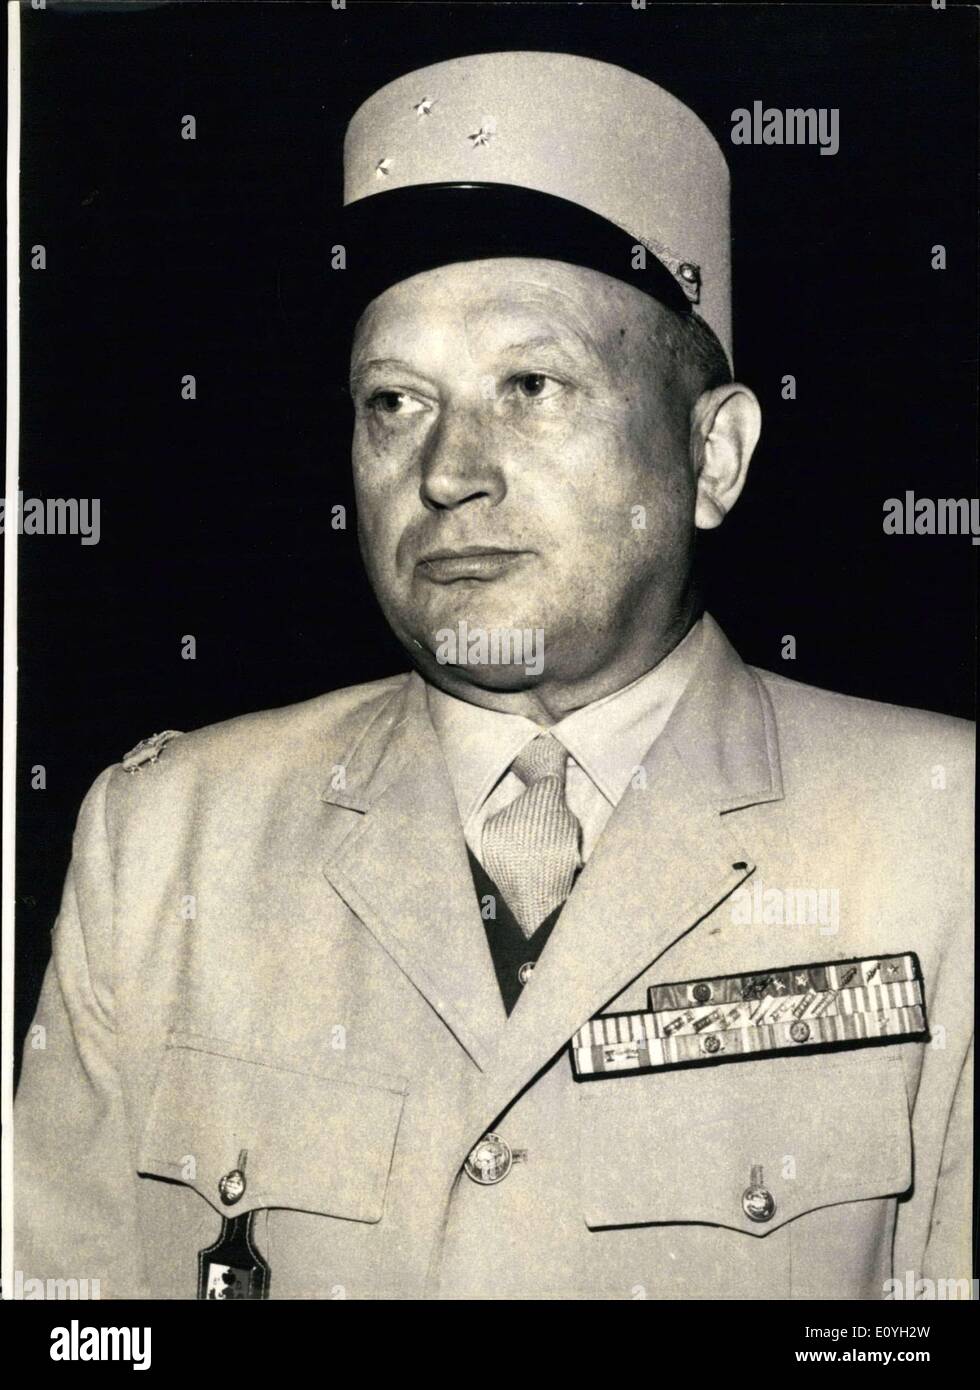 May 08, 1970 - General of the Army Corps Gerard Lecointe was just named Commander of French forces in Germany, and will be replacing General Jean-Louis du Temple de Rougement. General Lecointe was born in Poitiers in 1912. He is Commander of the Legion of Honor and holds 7 honorable mentions. Stock Photo